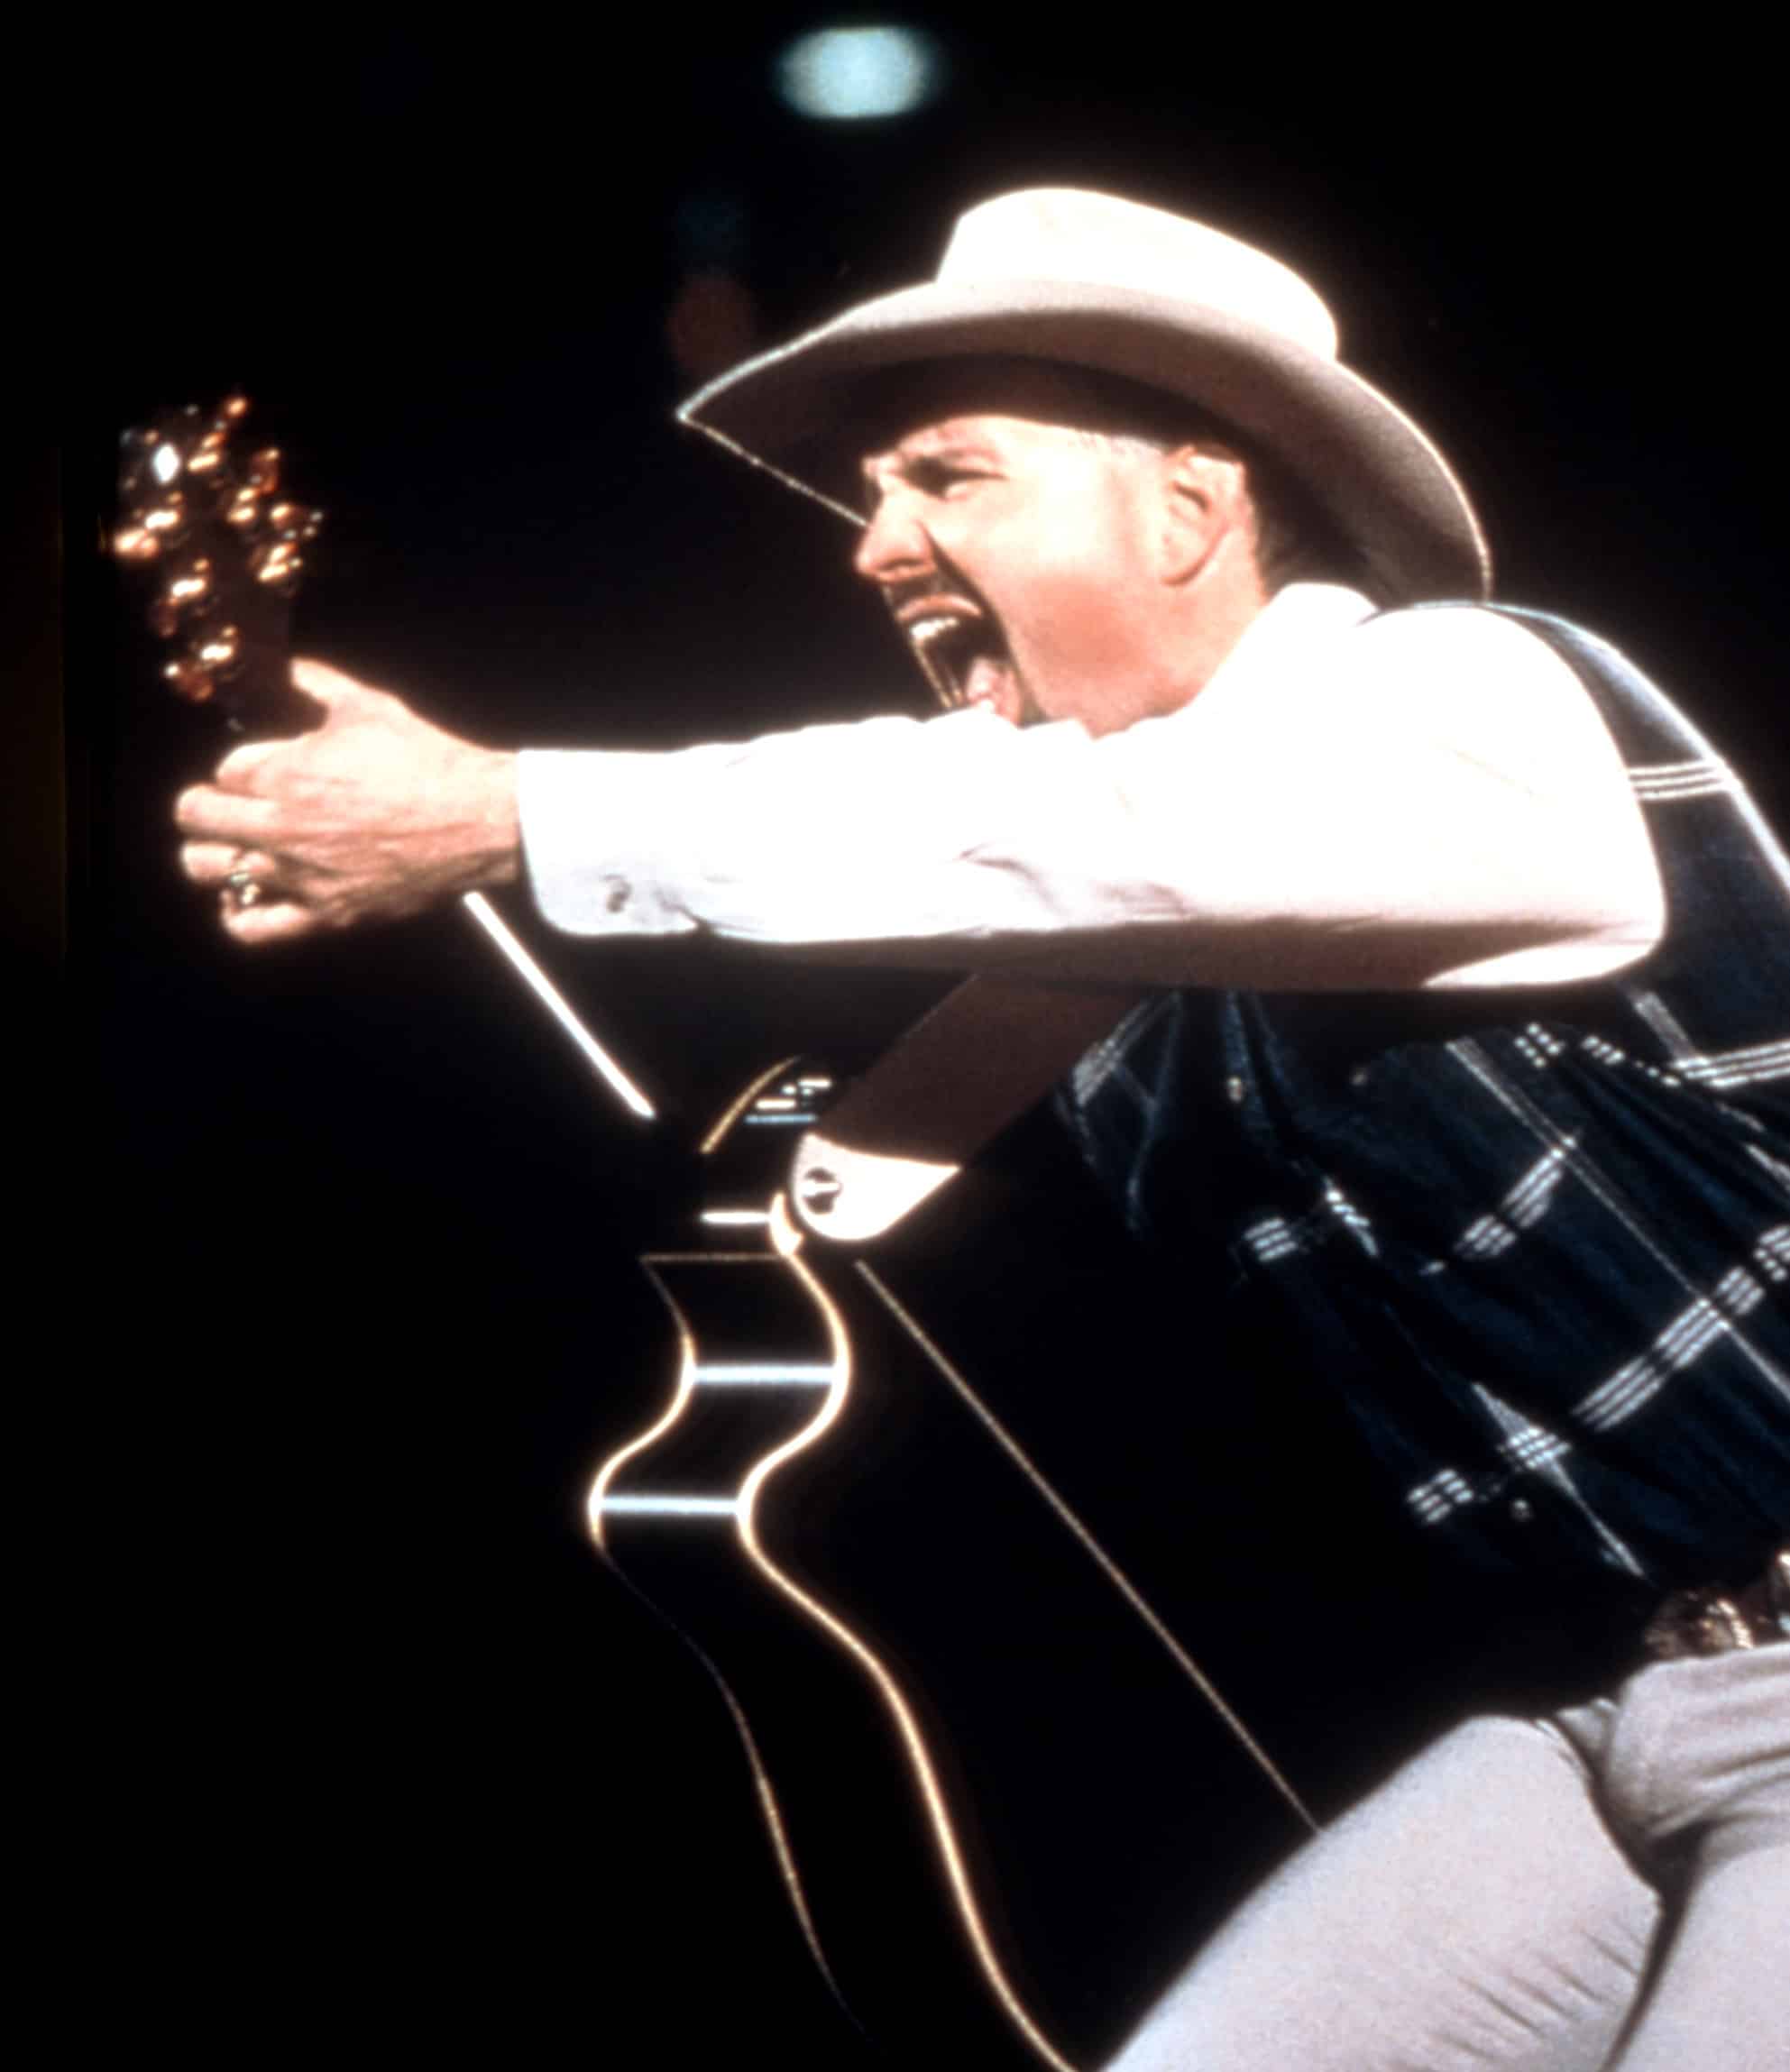 Garth Brooks performing during a show